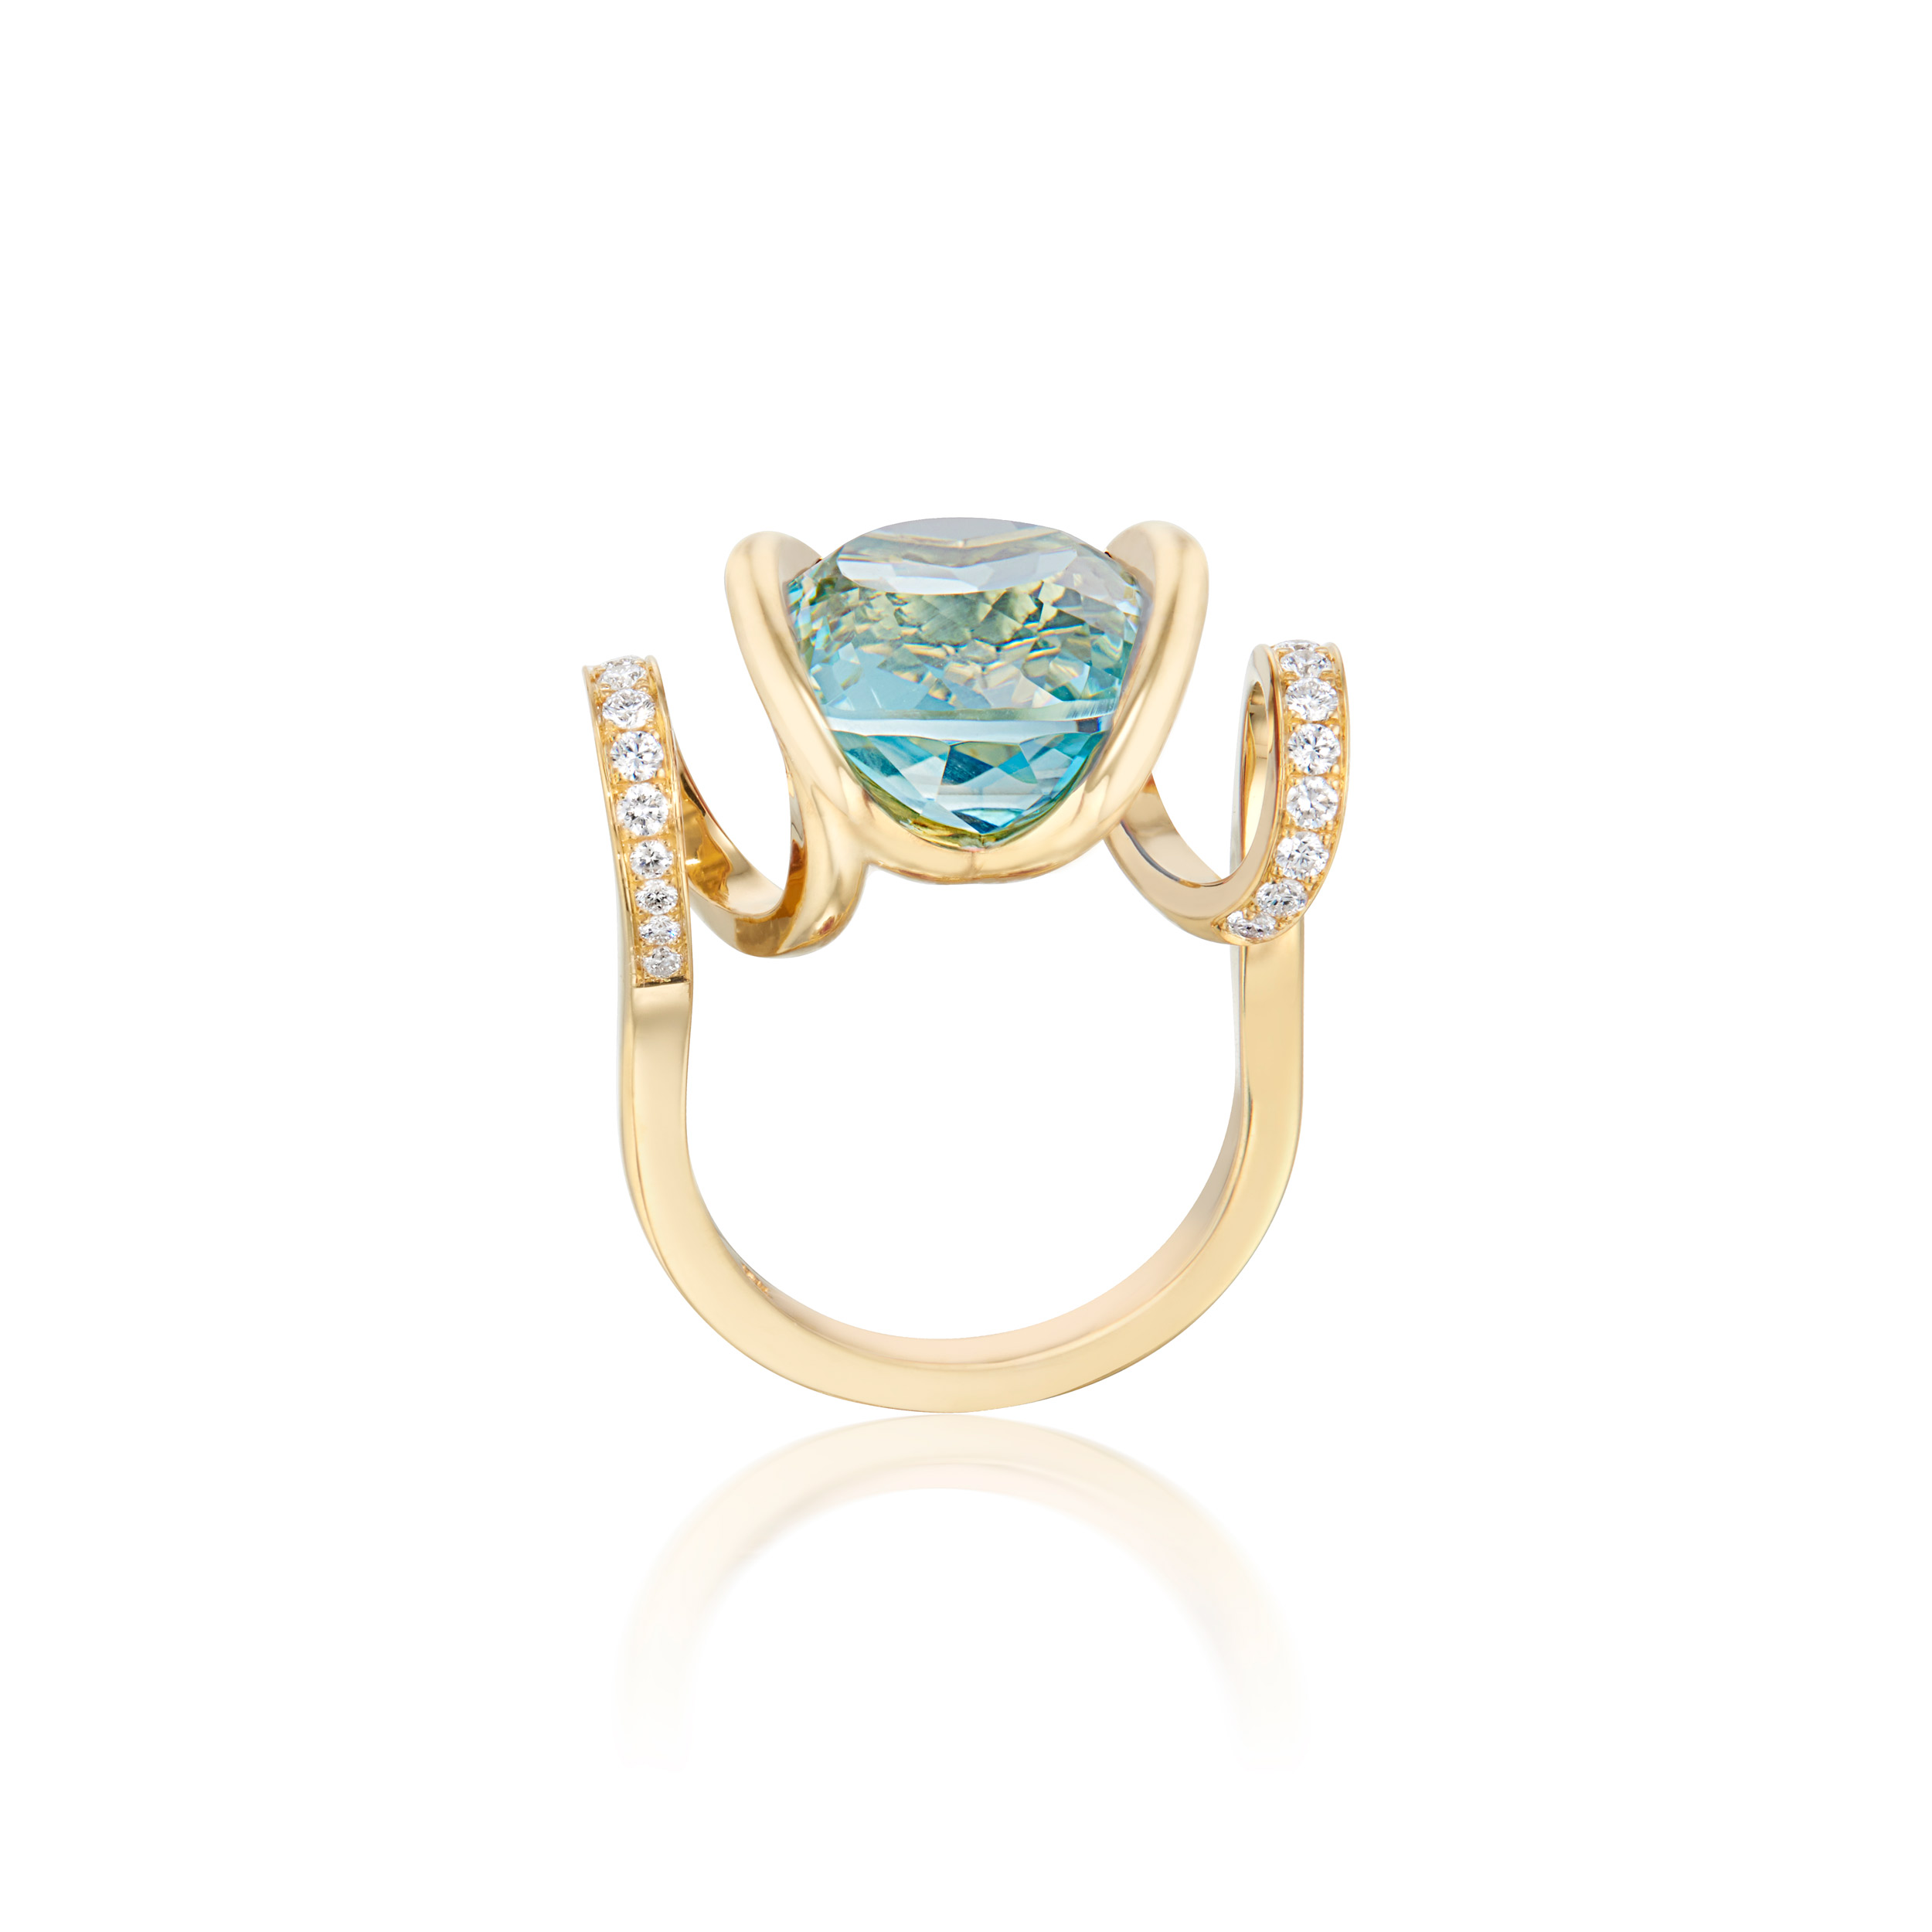 This is a Curl Ring with Aquamarine Center from Renisis by designer, Sardwell. It is made of 18K yellow gold with aquamarine and pavé diamonds. Its unique design includes a curled gold shape and setting.